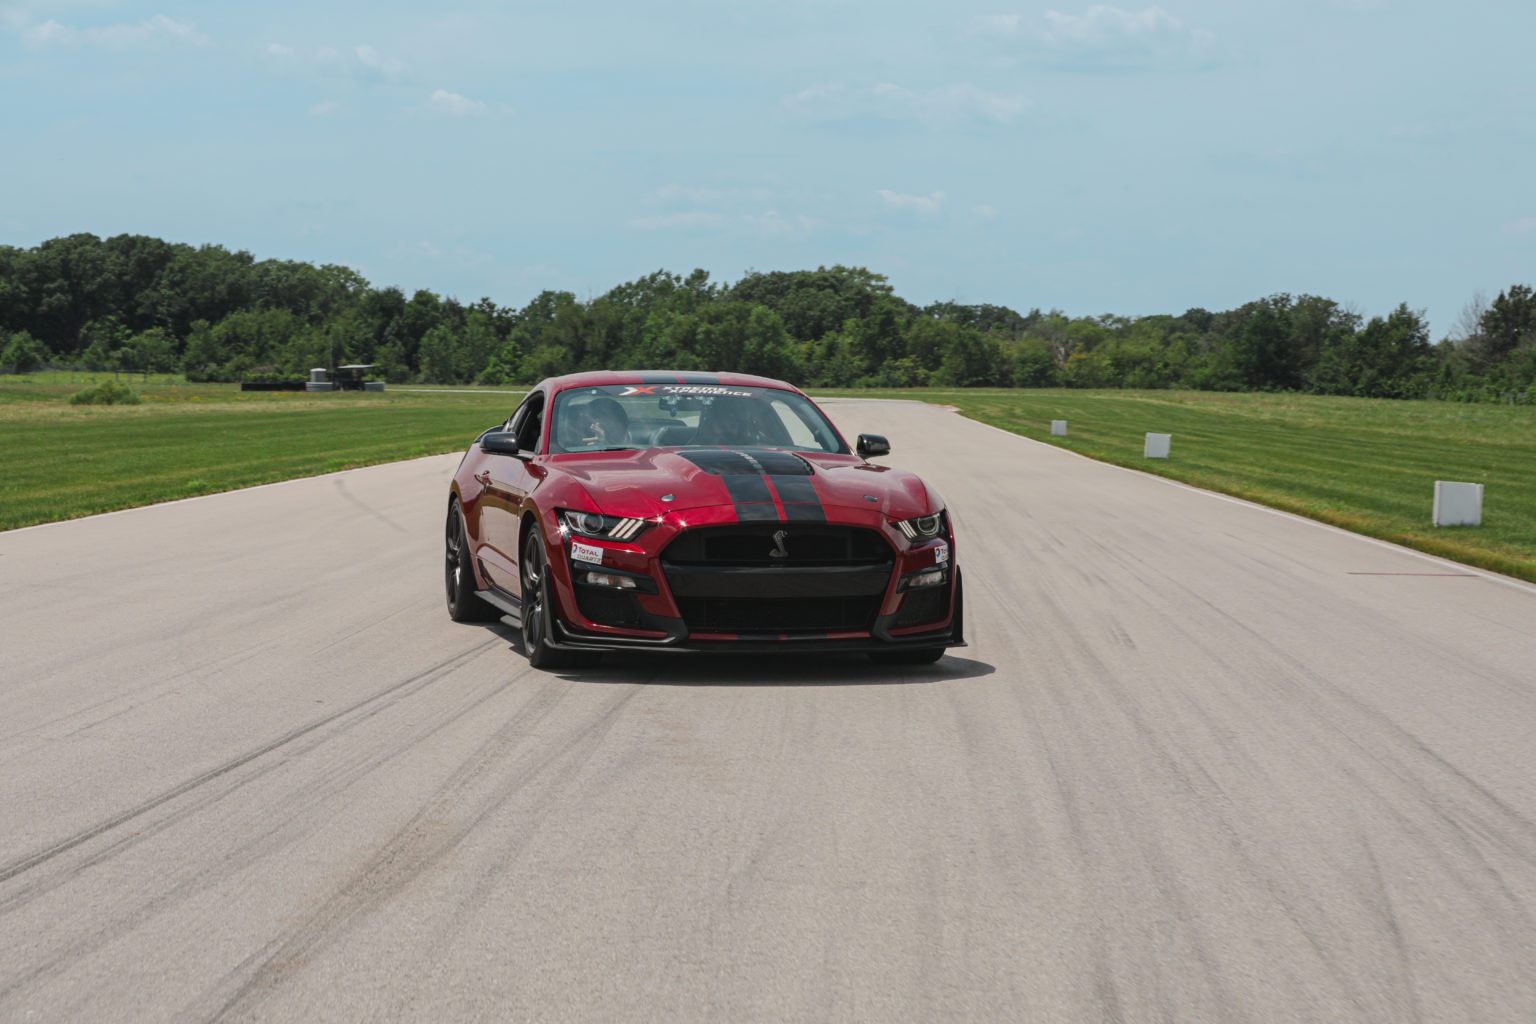 Xtreme Xperience.s Mustang Shelby GT500 driving on a racetrack